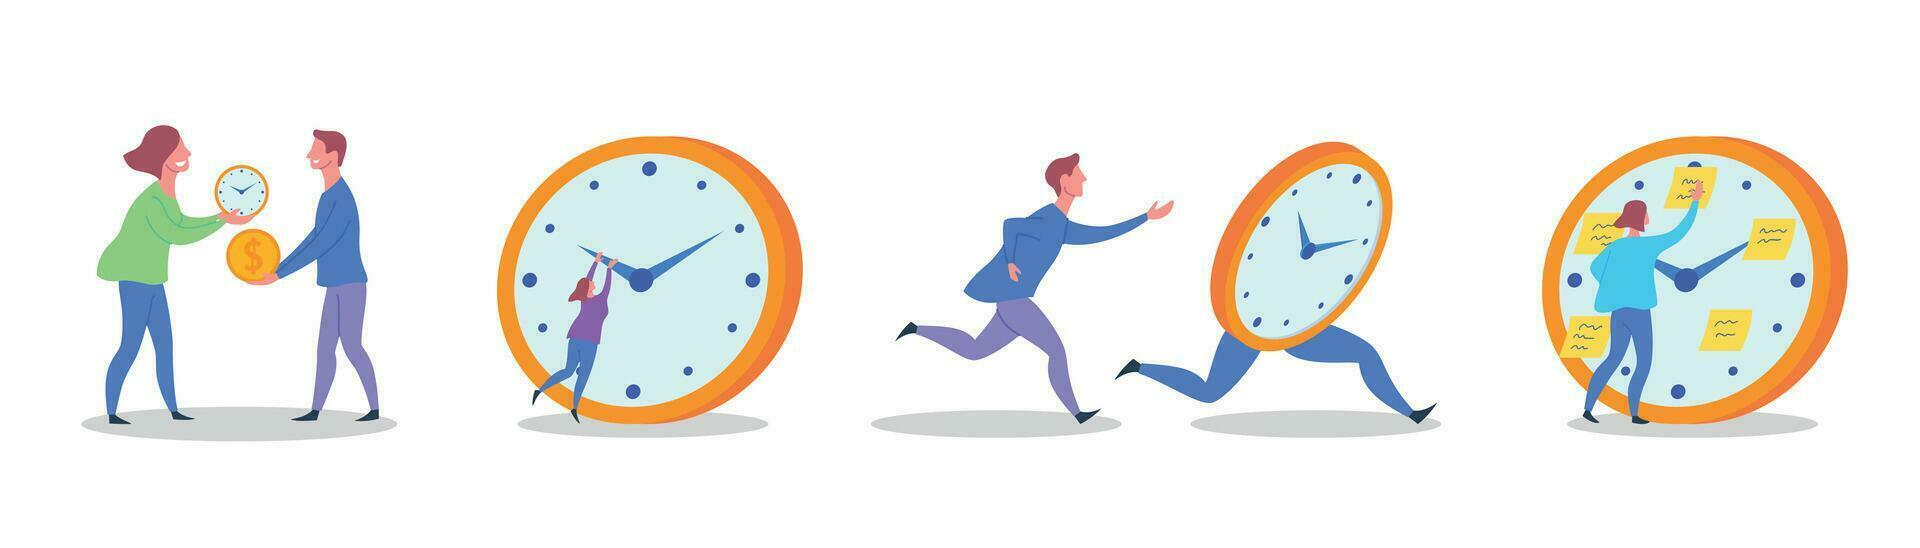 Cartoon Color Characters People and Time Interaction Concept. Vector